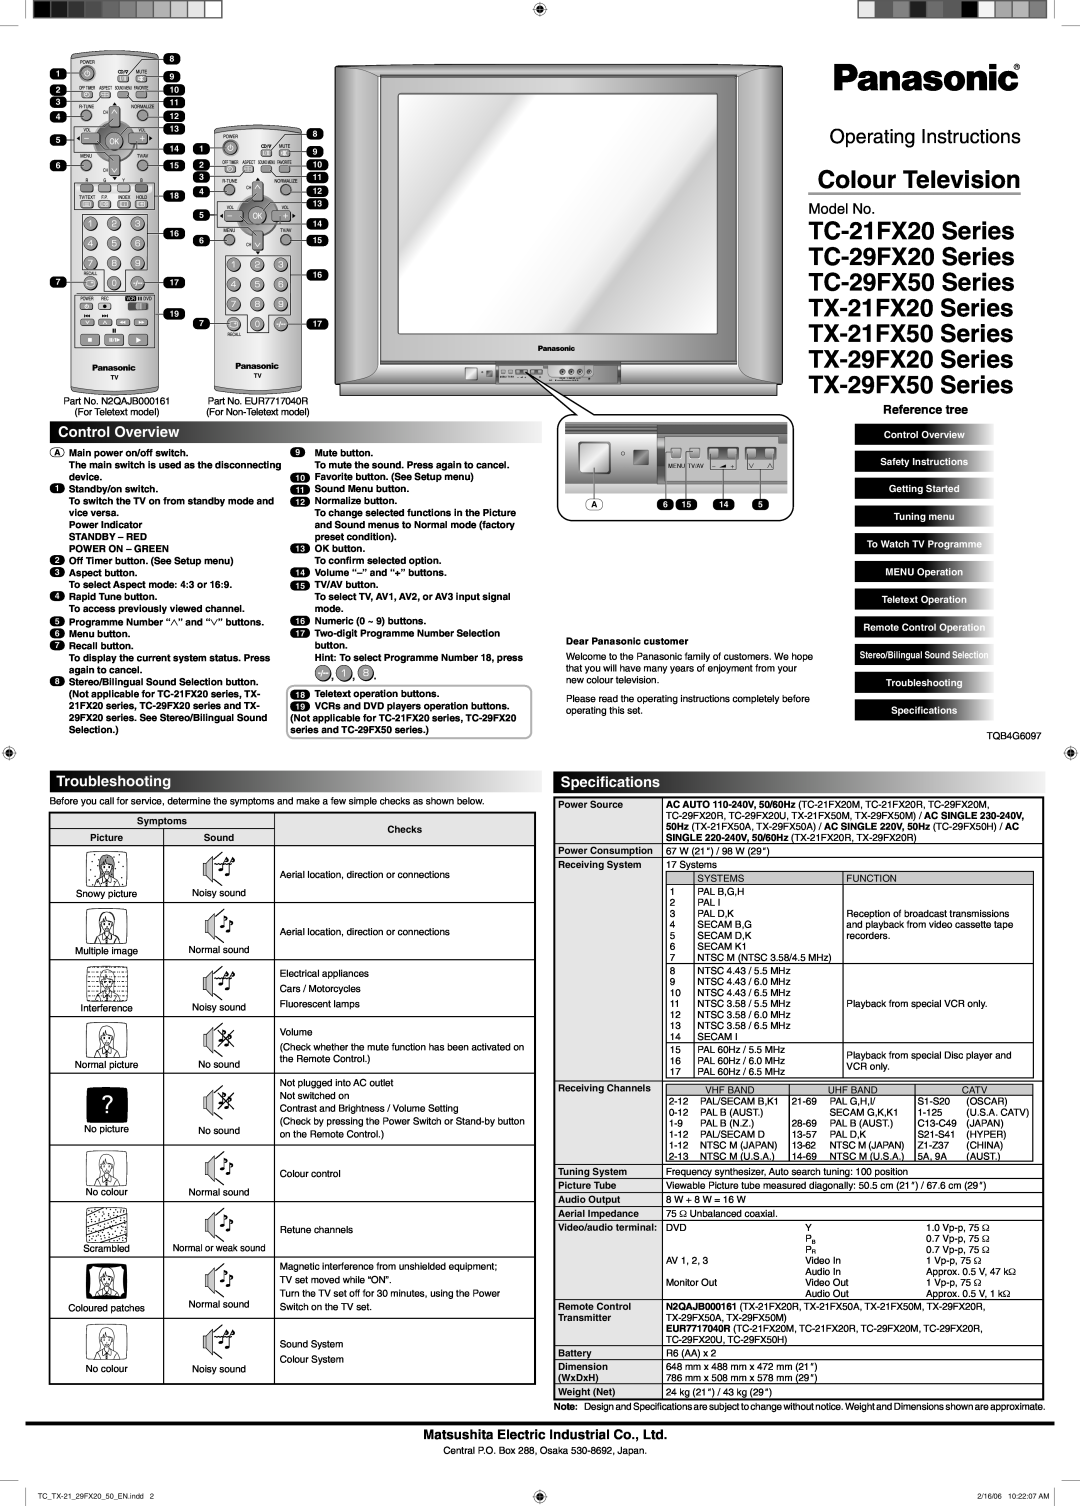 Panasonic TC-21FX20 Series operating instructions Model No, Control Overview, Troubleshooting, Speciﬁcations 